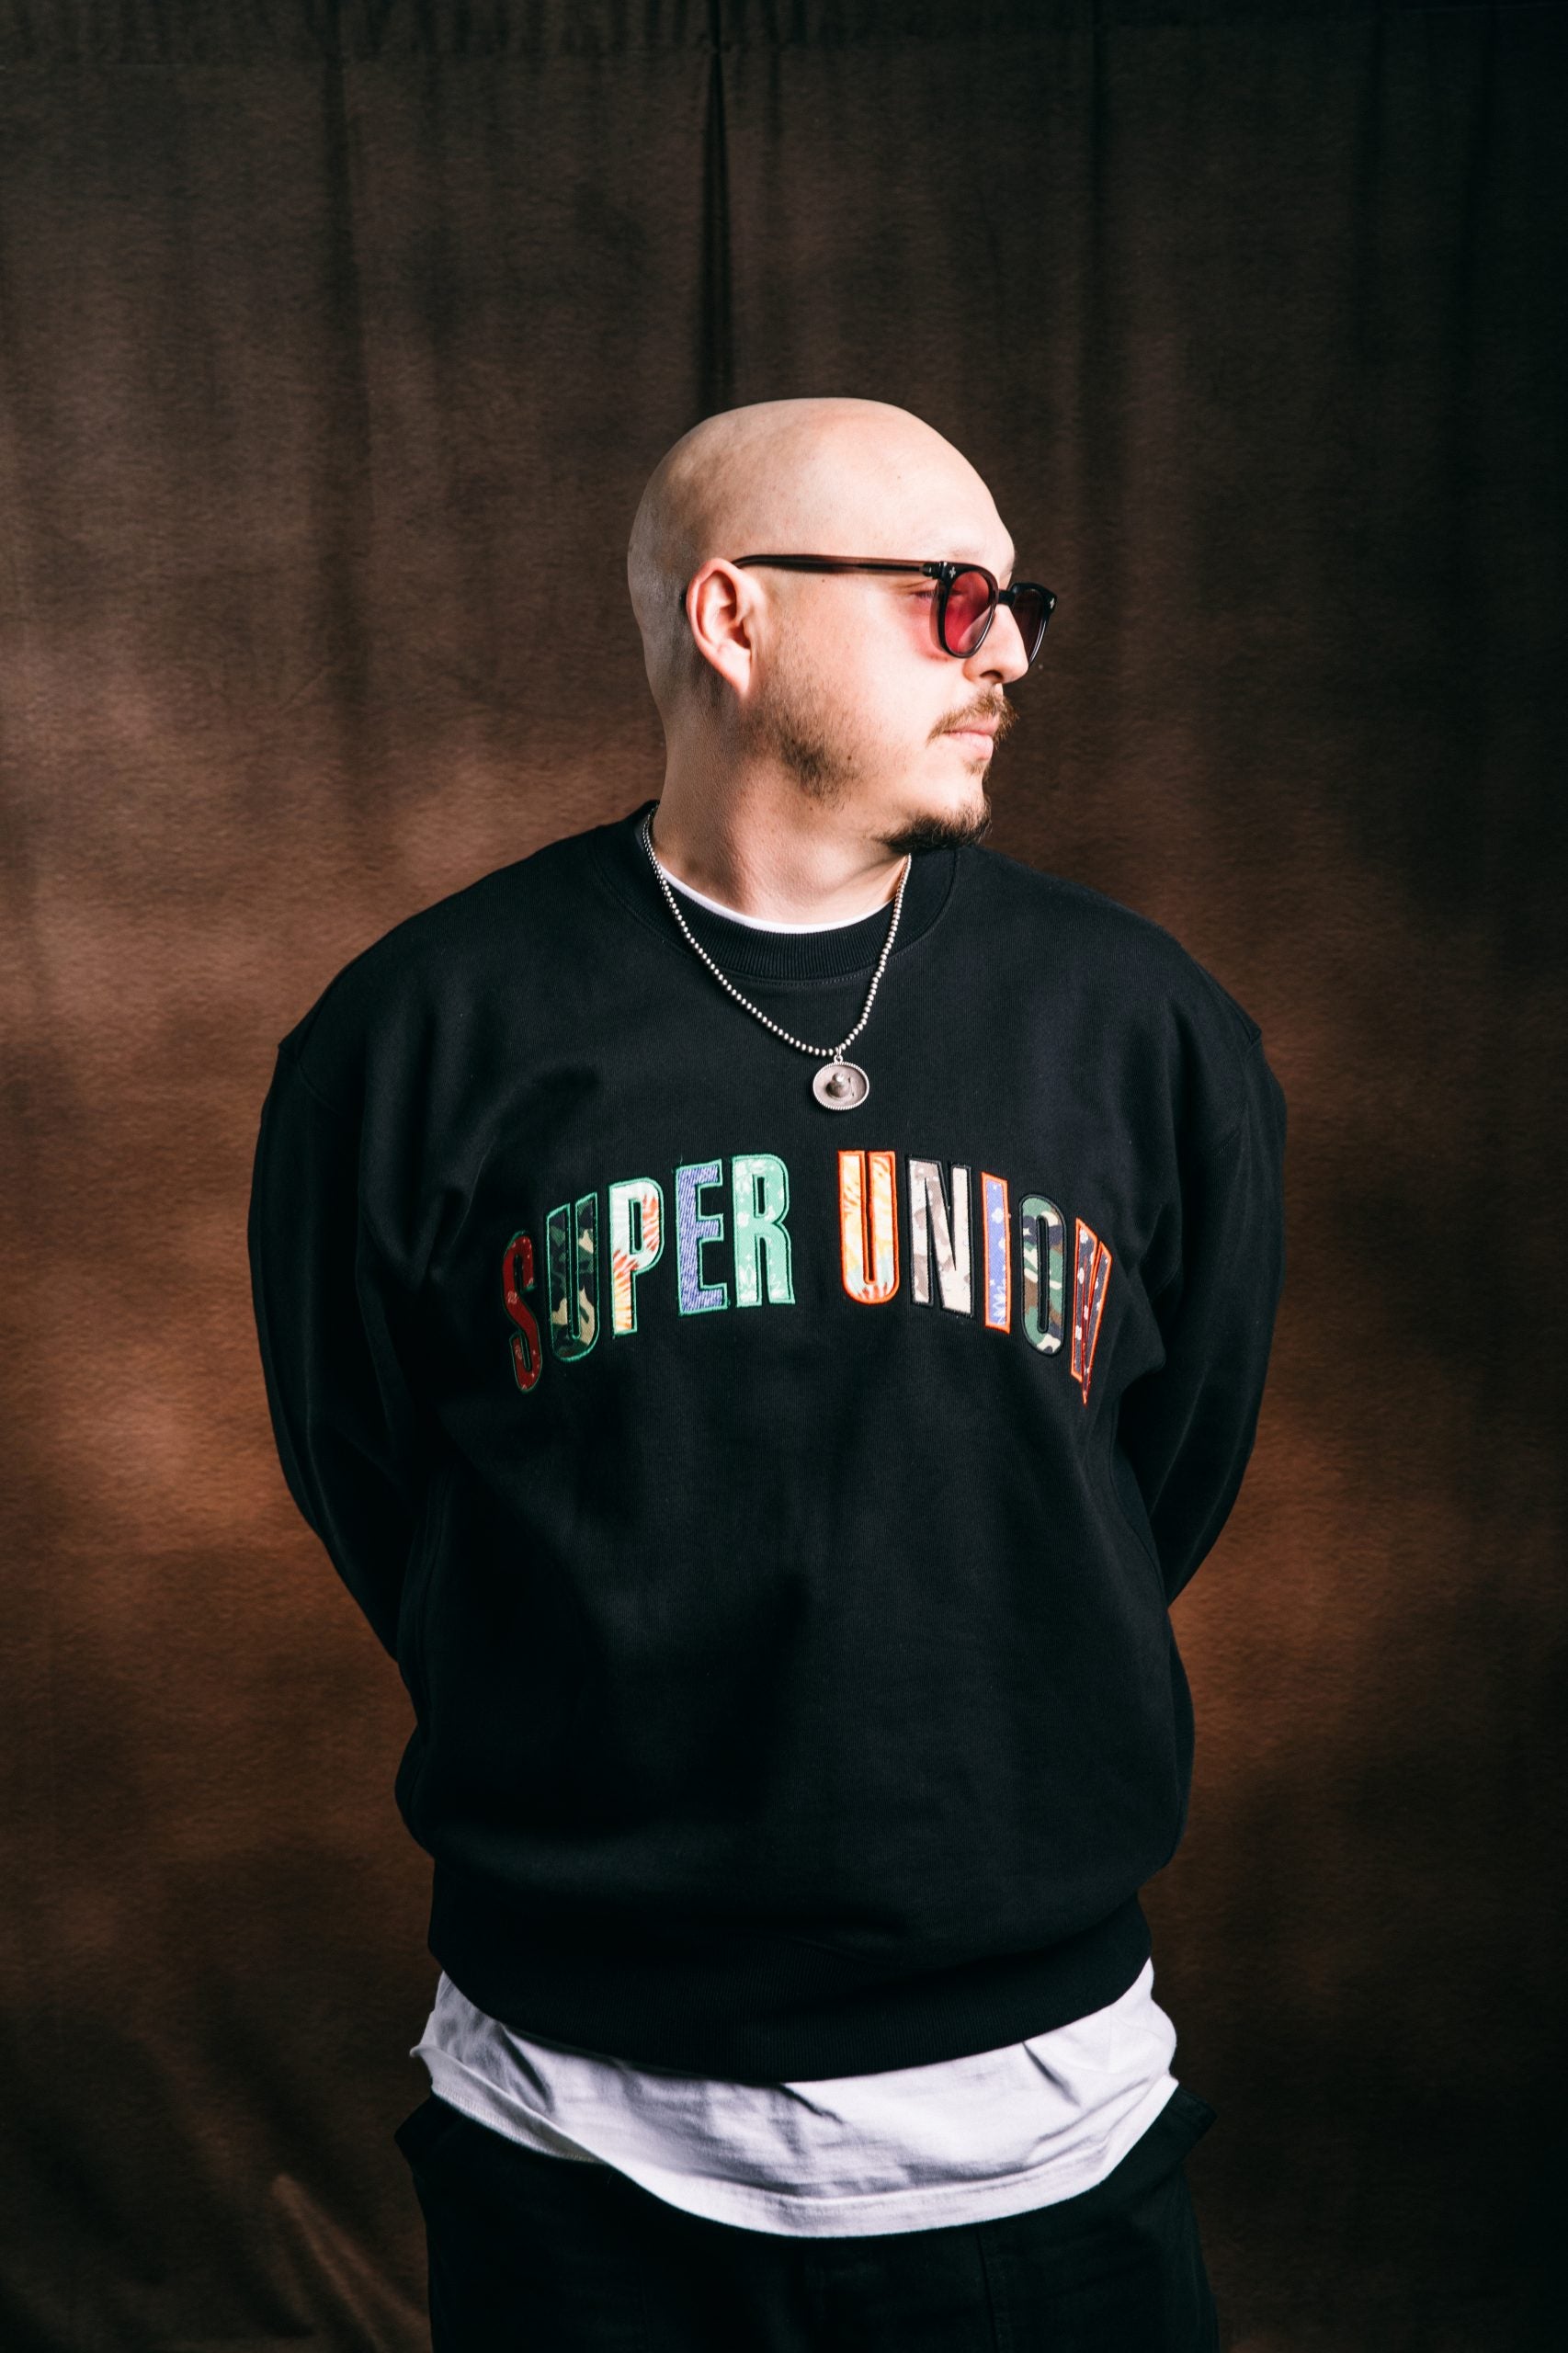 Union LA And Supervsn Join Forces To Promote Community And Present A New Capsule Collection